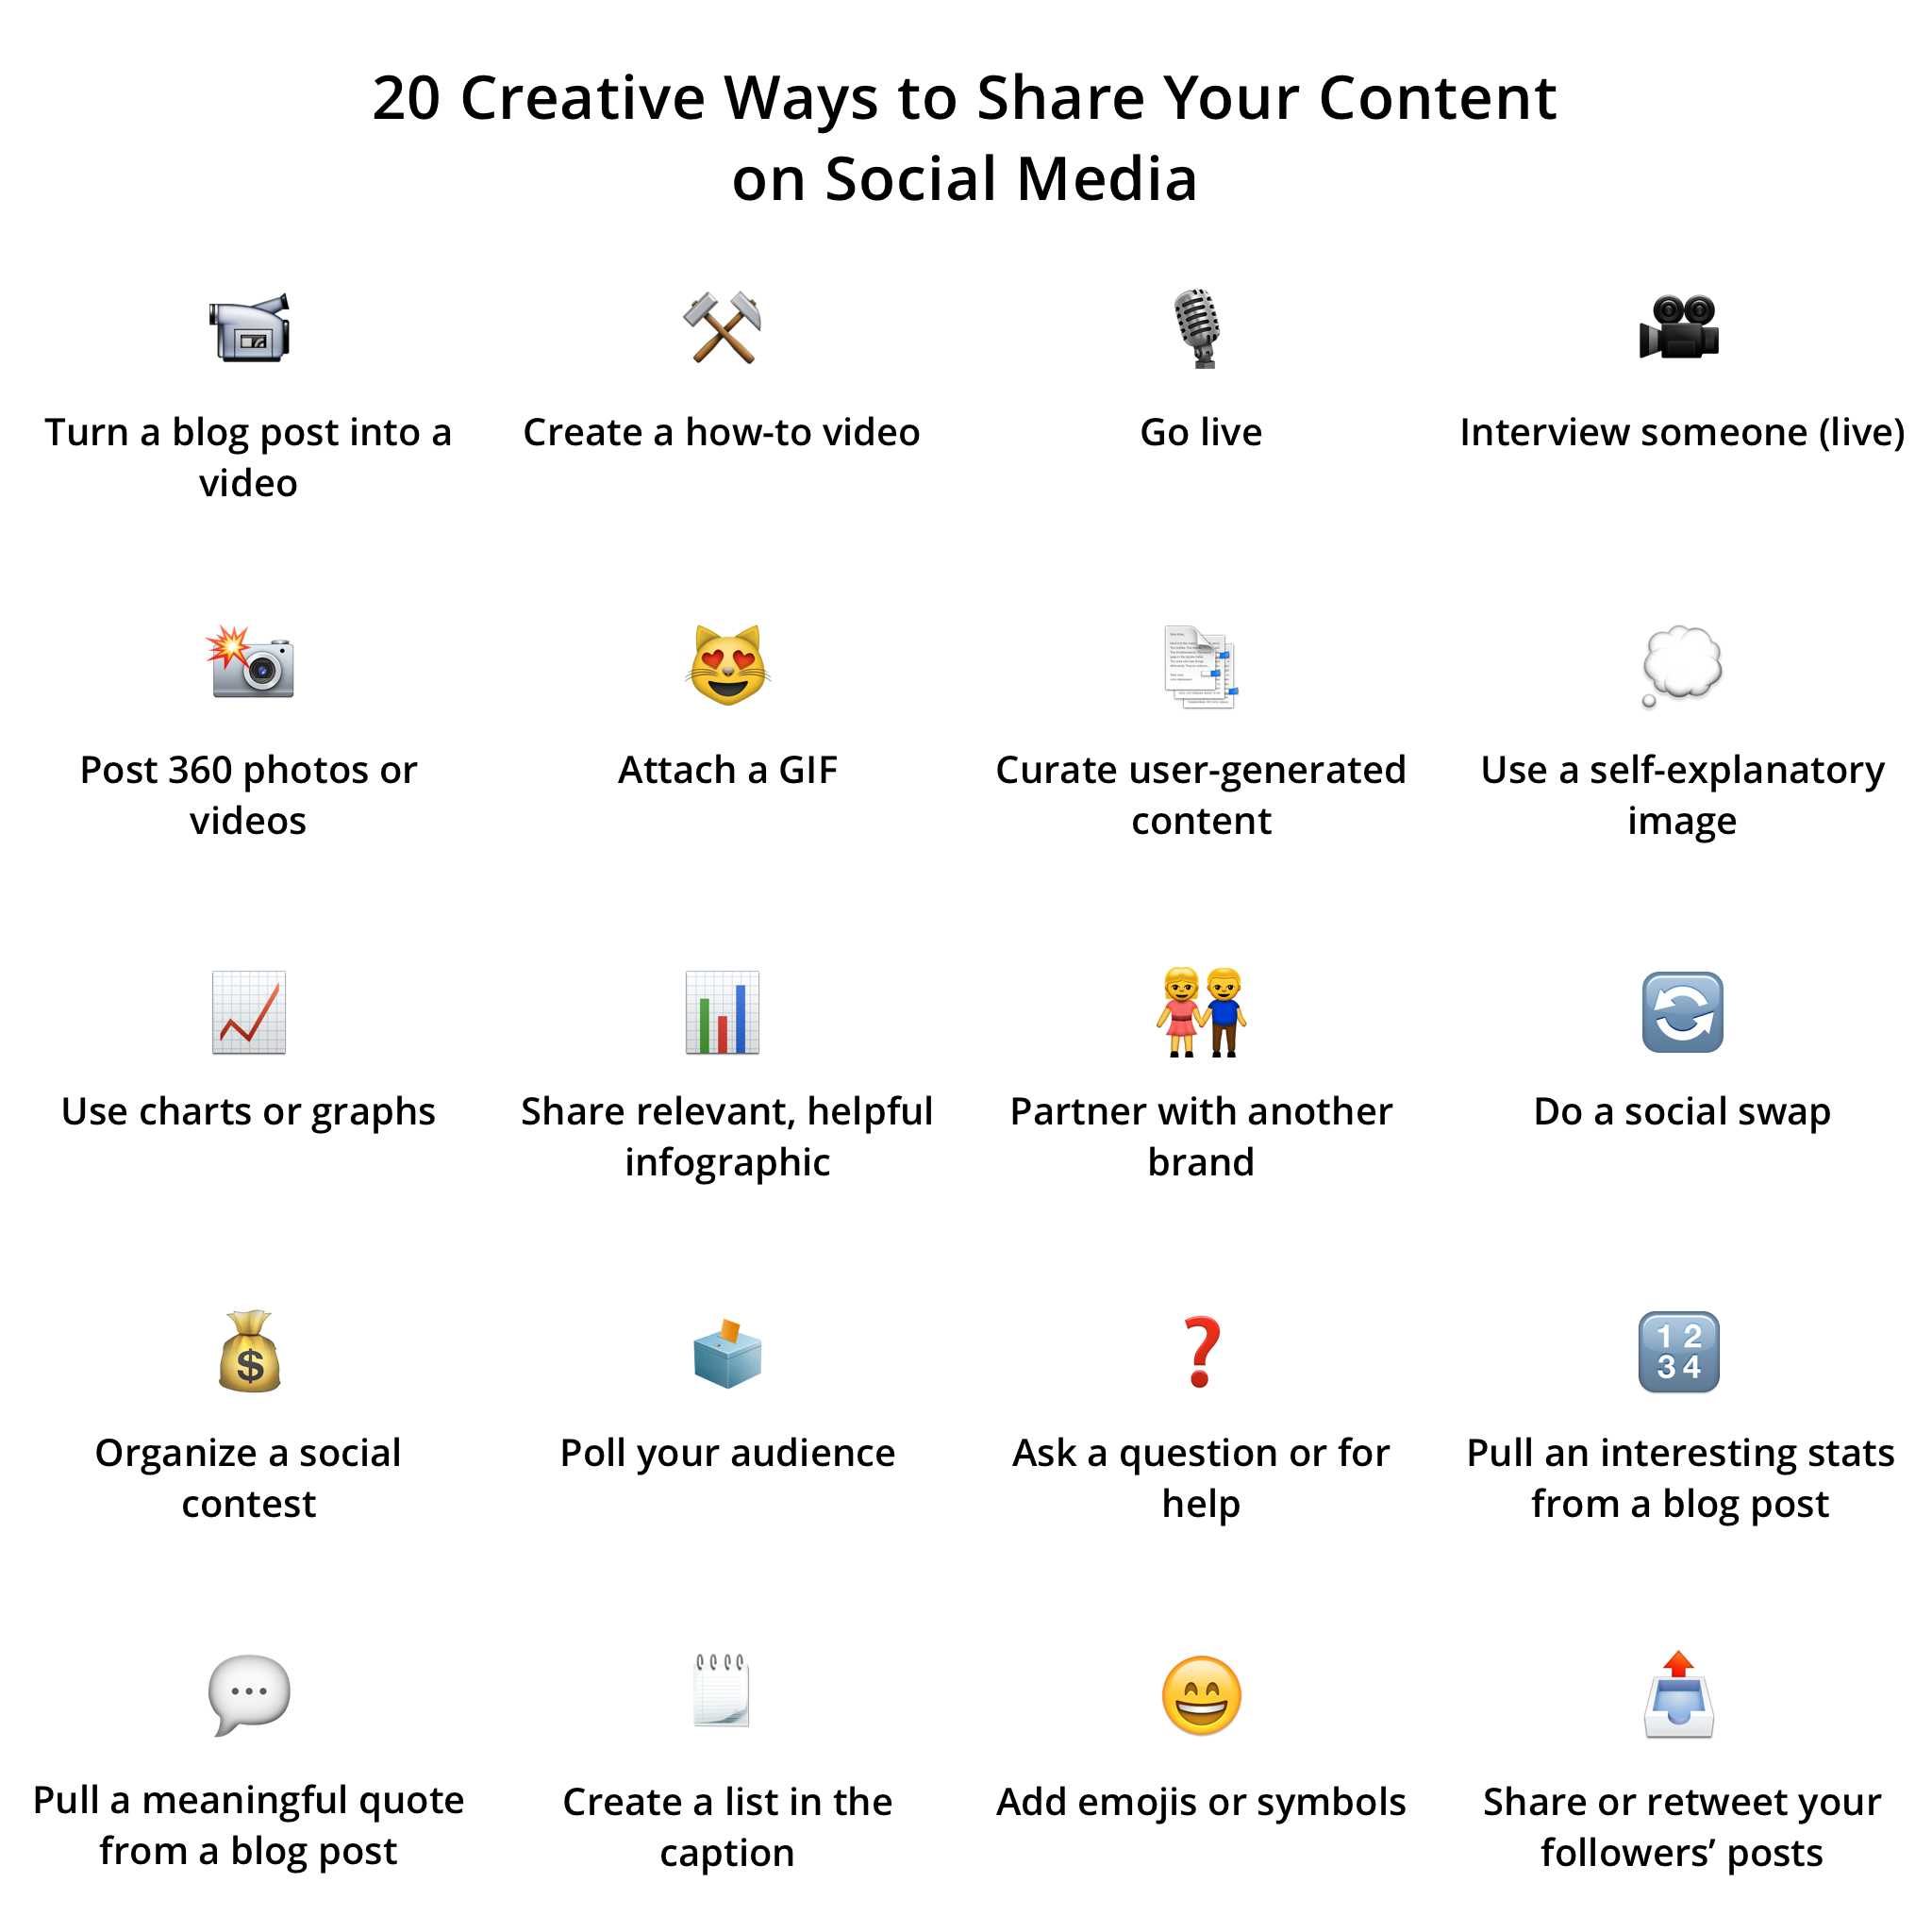 social-media-content-ideas-infographic-bw.png